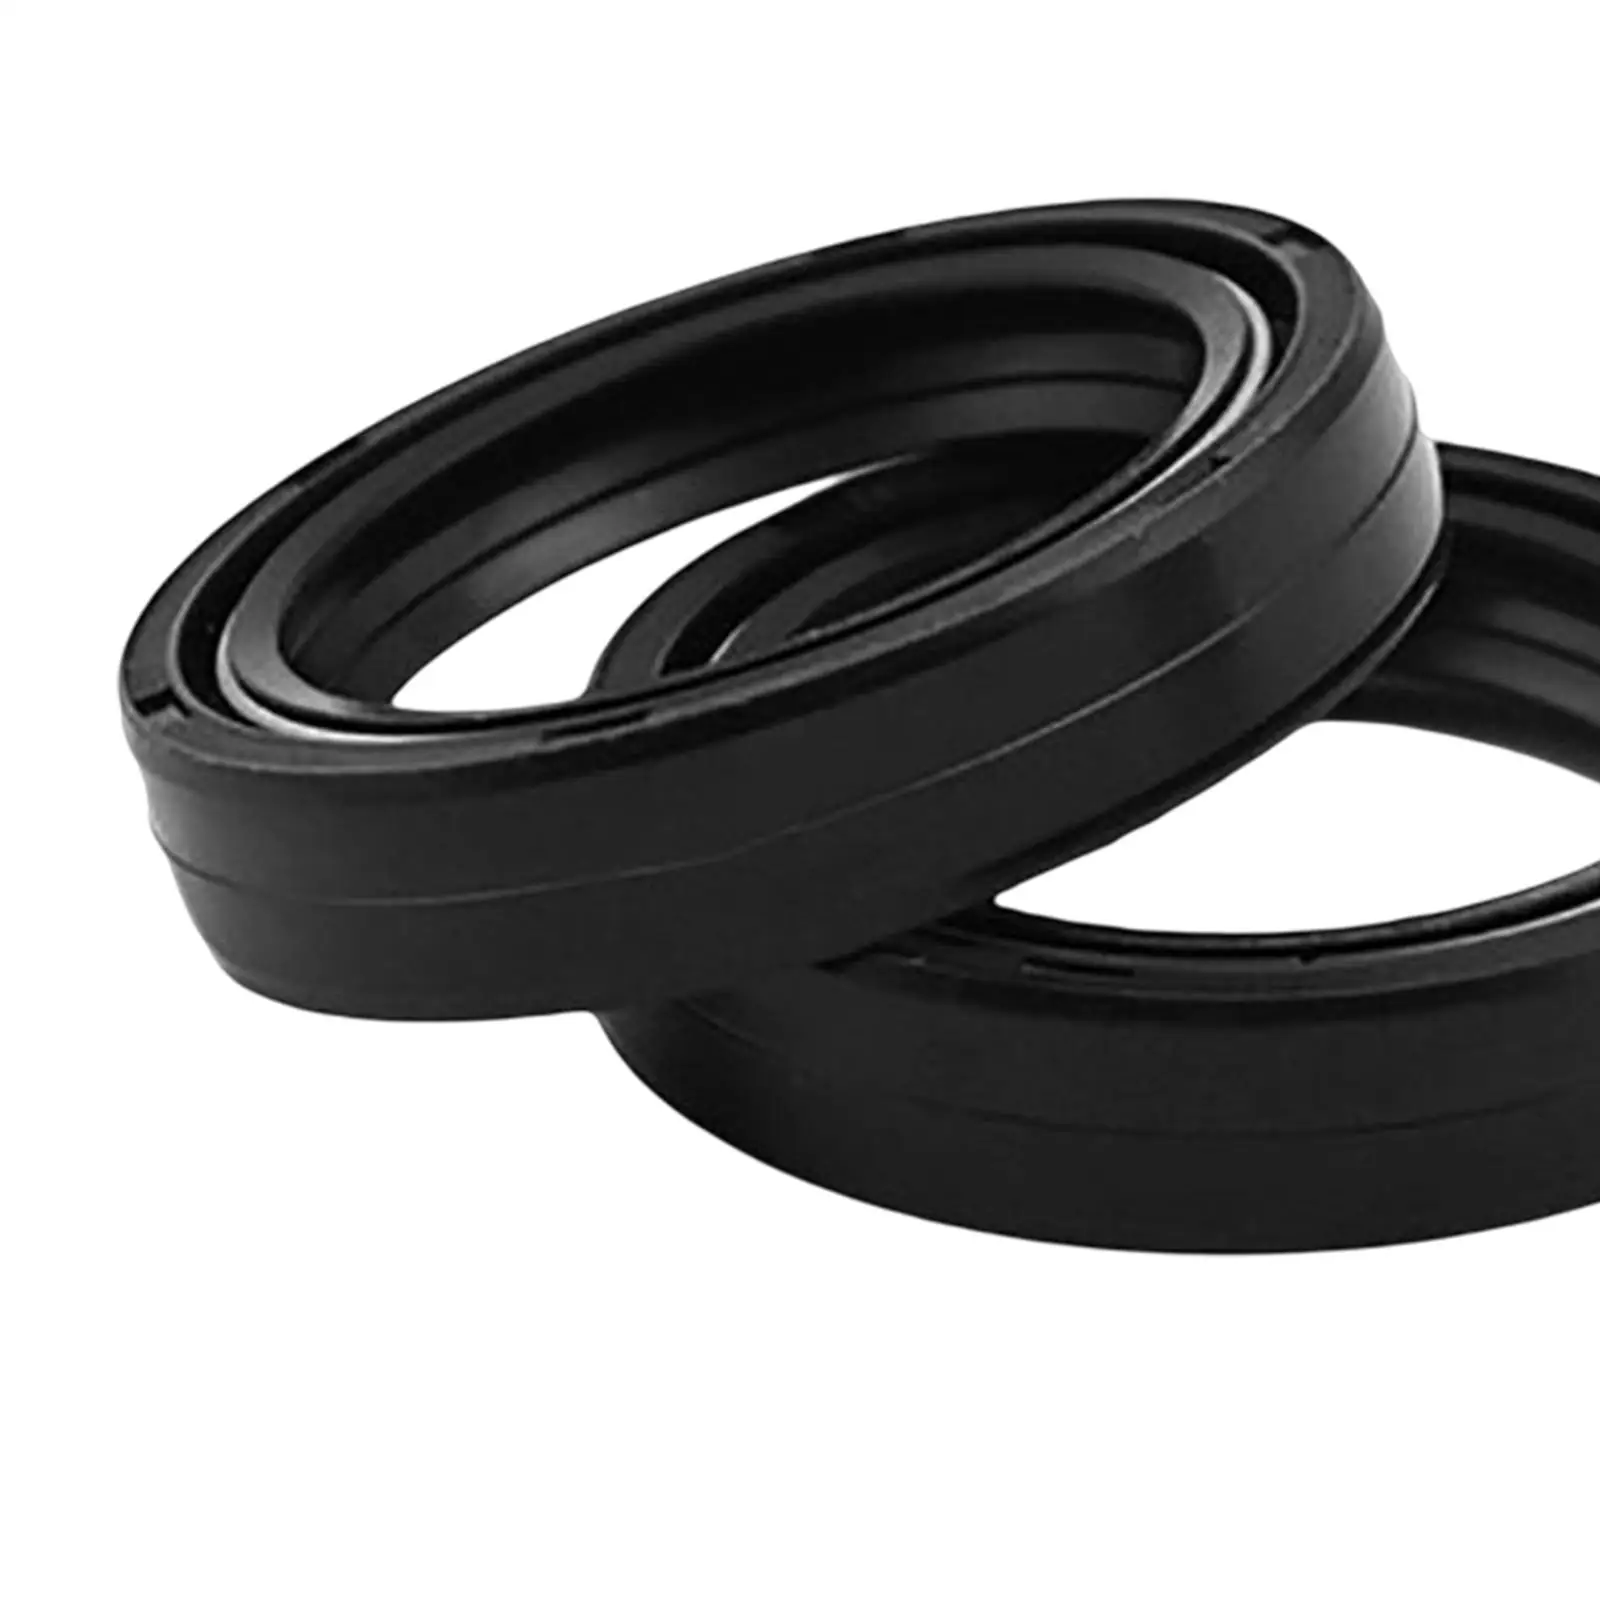 Motorcycle Fork Seal and Dust Seal Kit 49x60x10mm for Kawasaki Klx400 VN2000 RM250